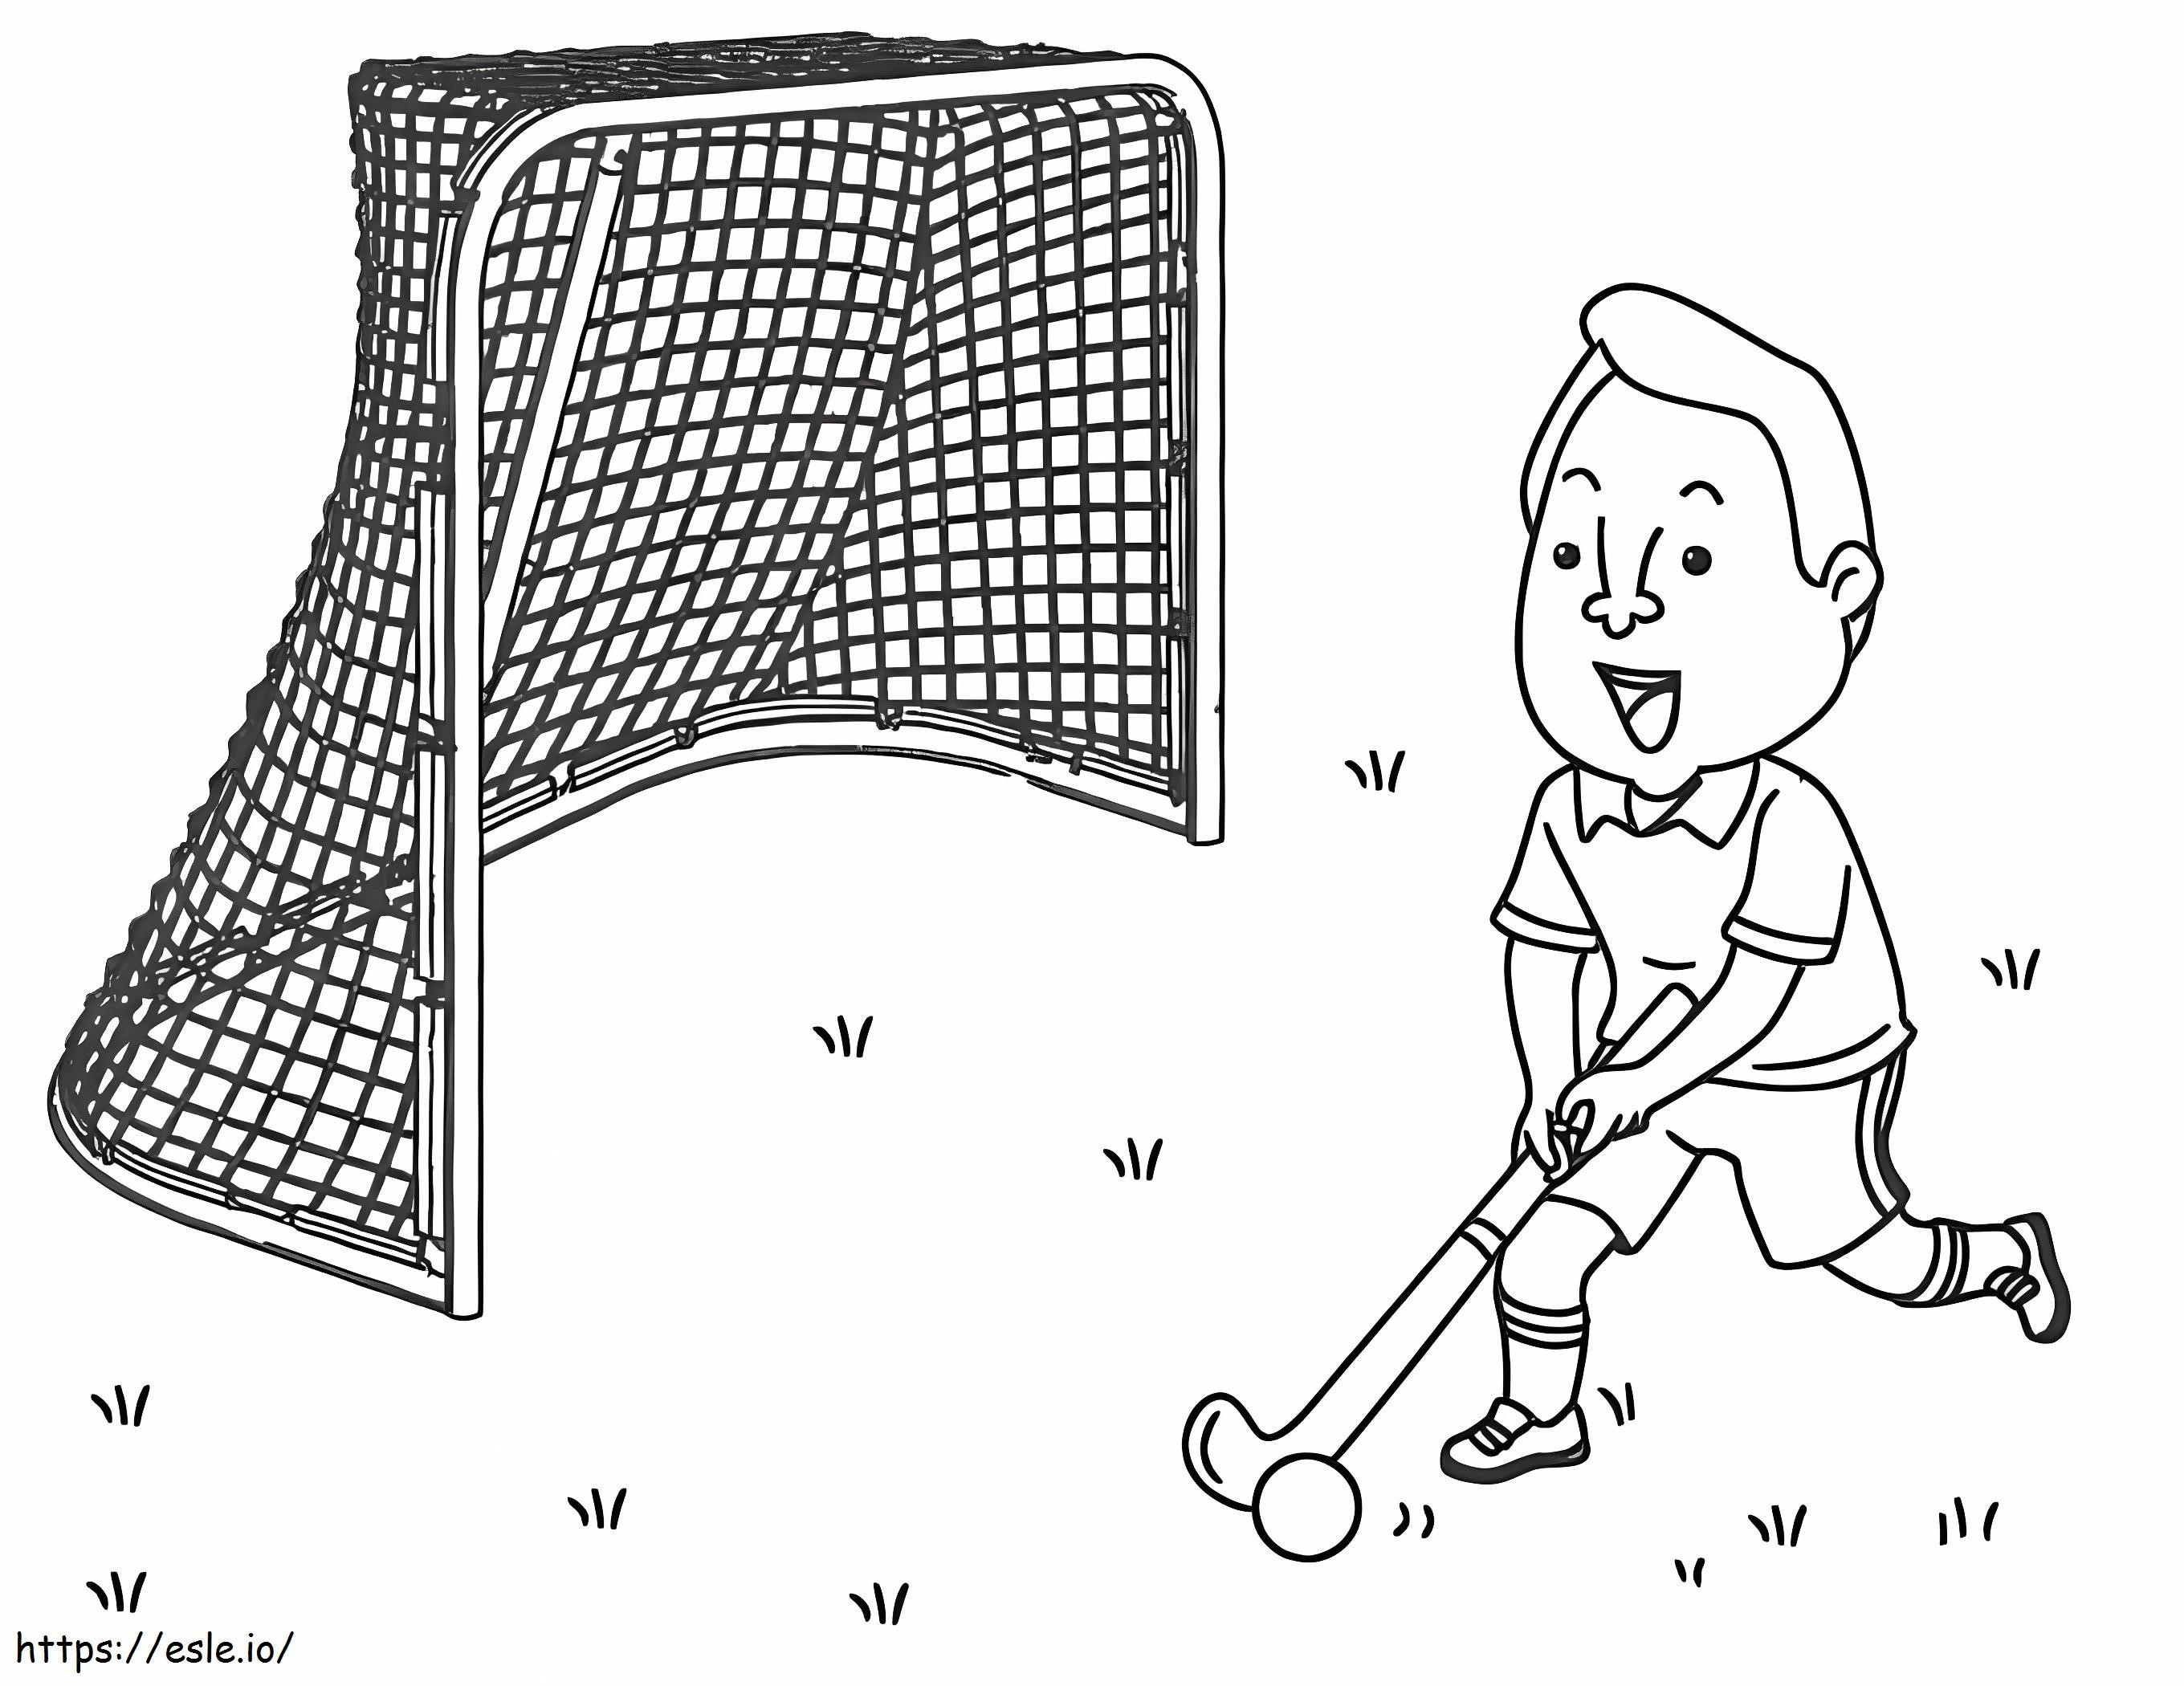 Cartoon Hockey Players coloring page